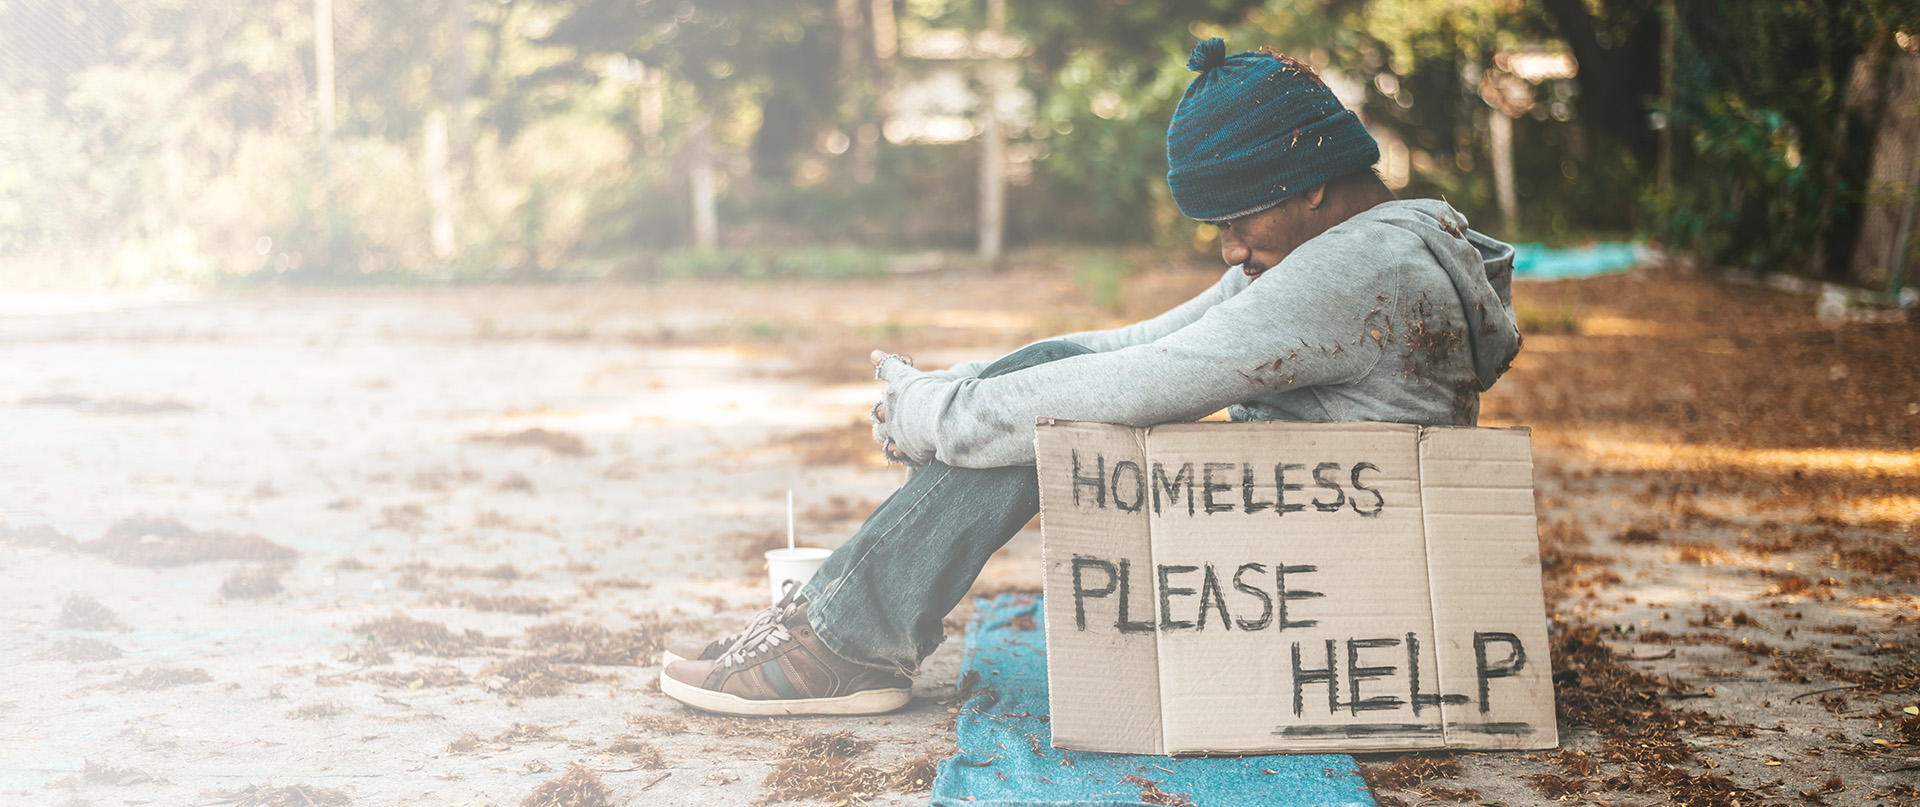 Beggars sitting on the street with homeless messages please help